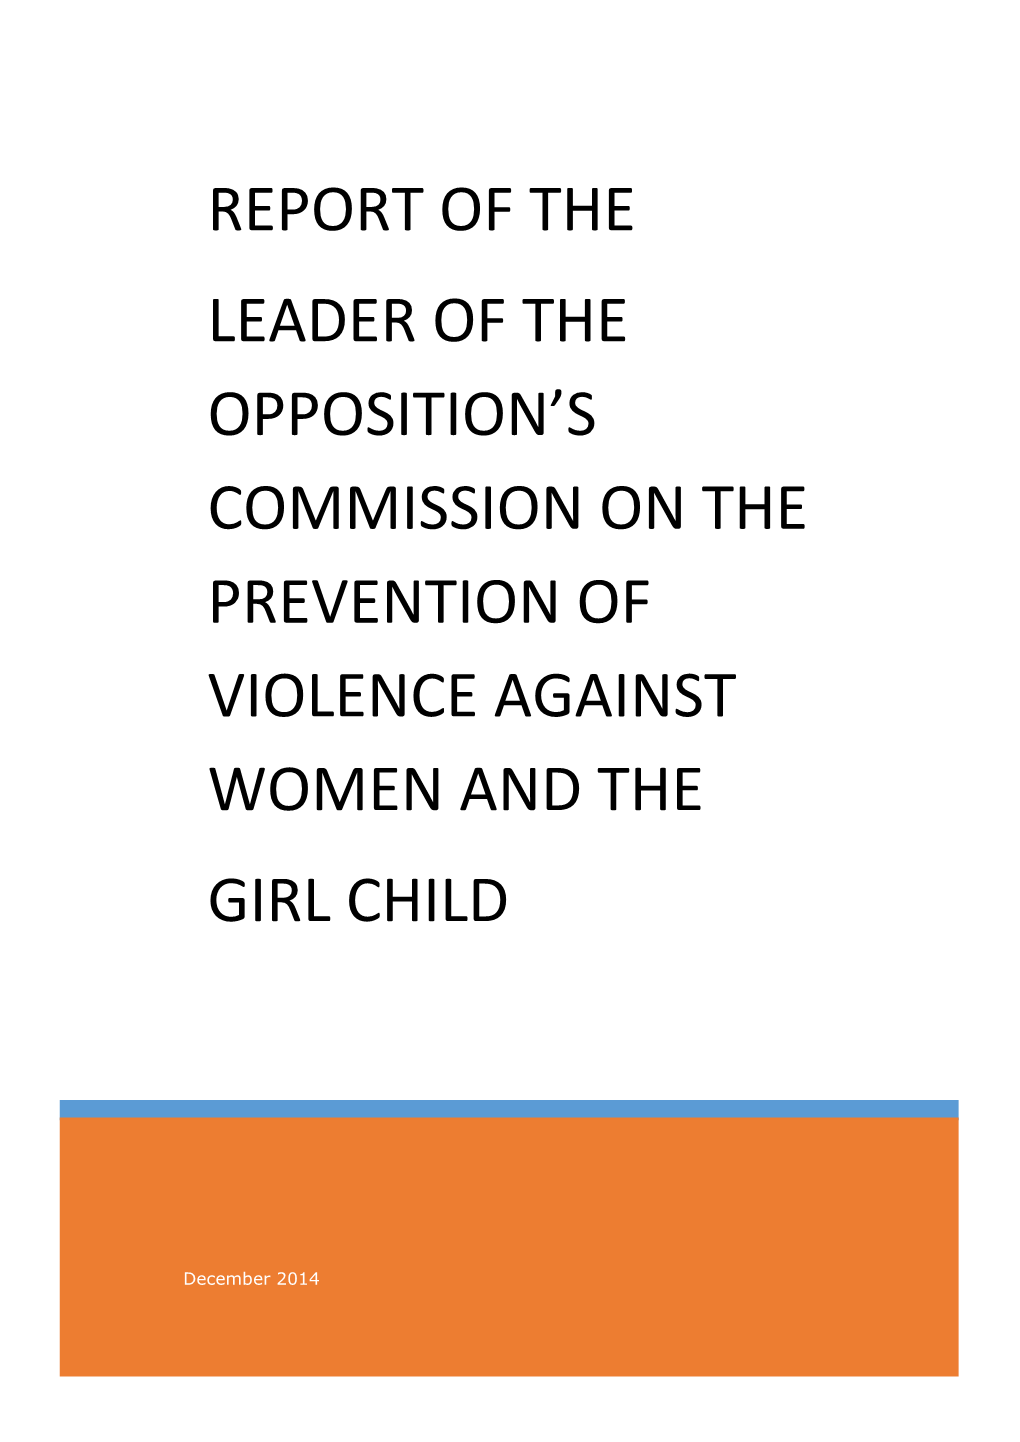 Report of the Leader of the Opposition's Commission on the Prevention of Violence Against Women and the Girl Child